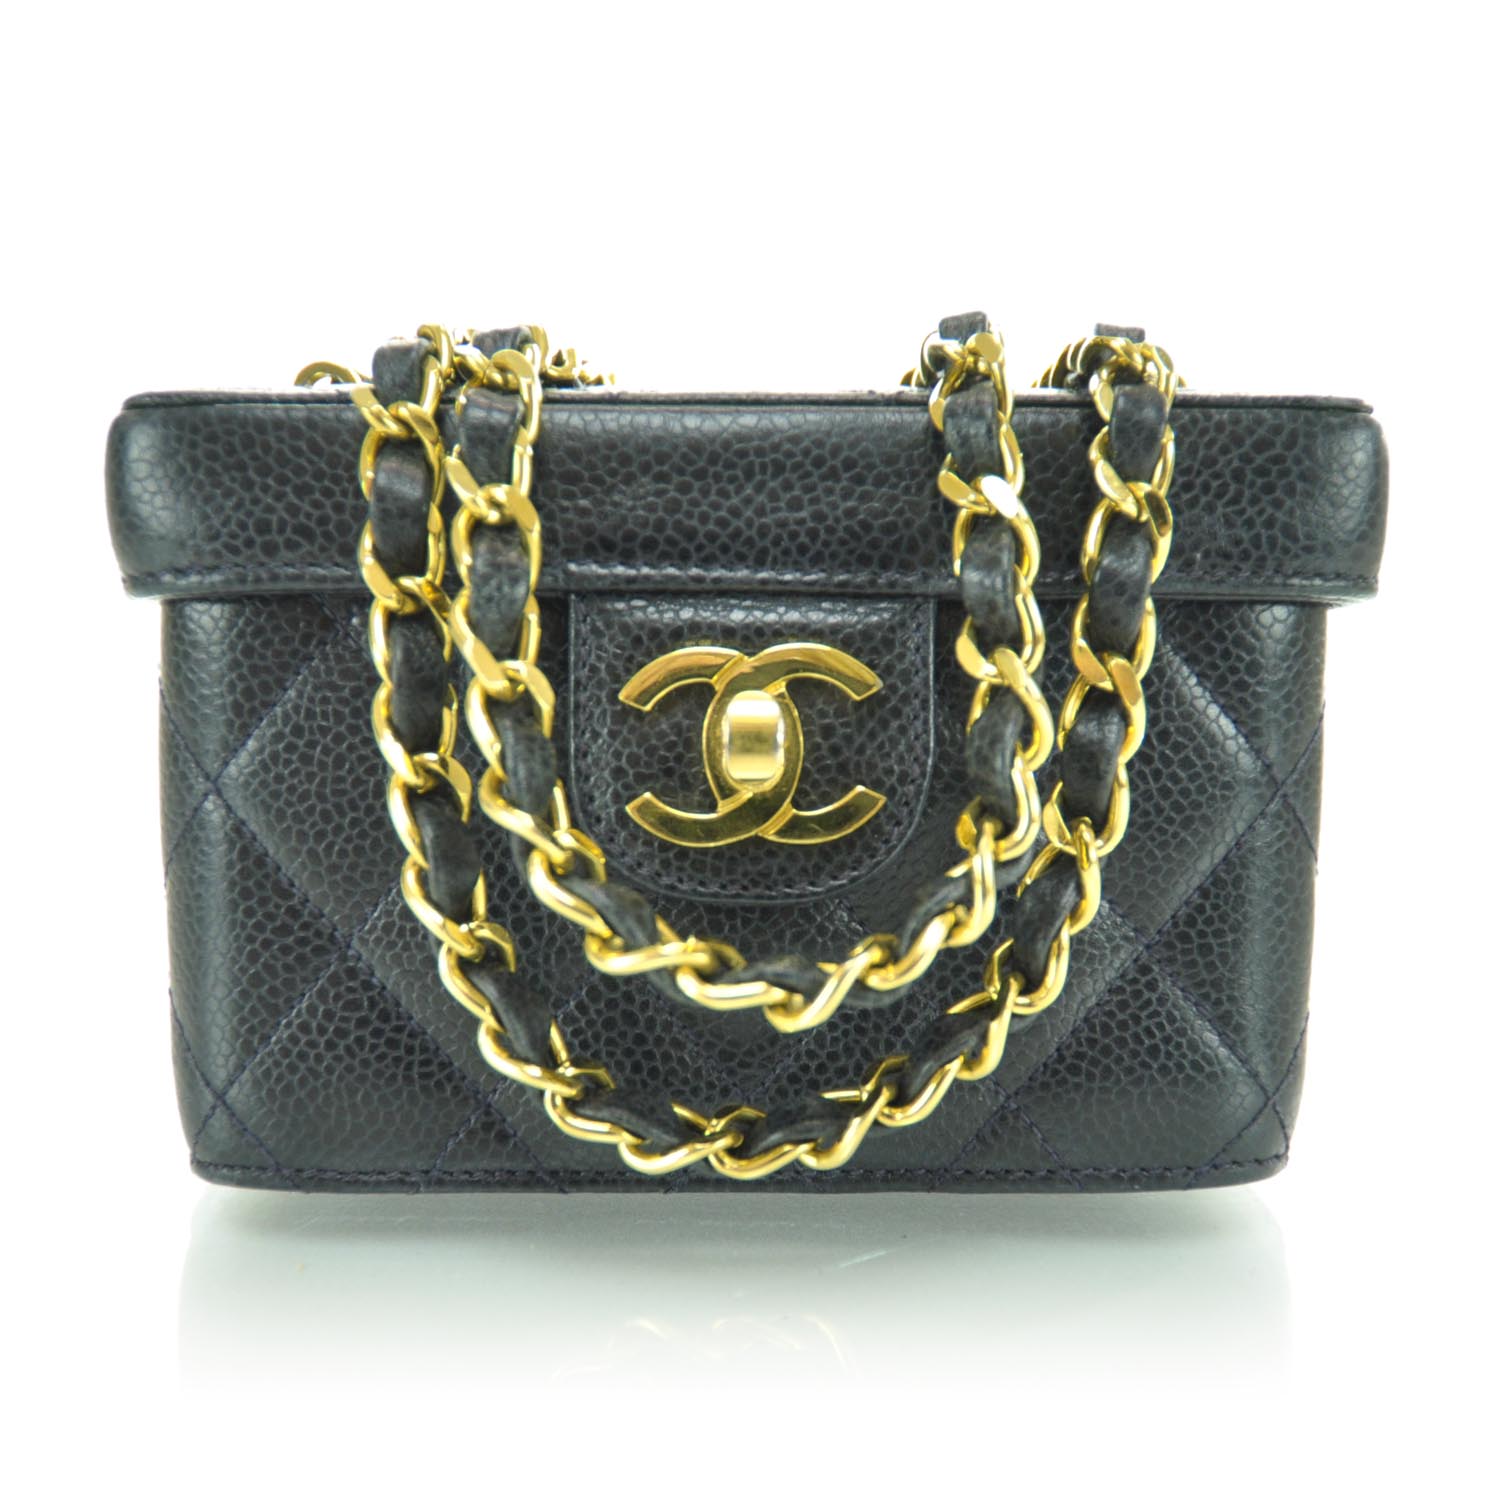 CHANEL Caviar Quilted Mini Vanity Bag Navy 29522